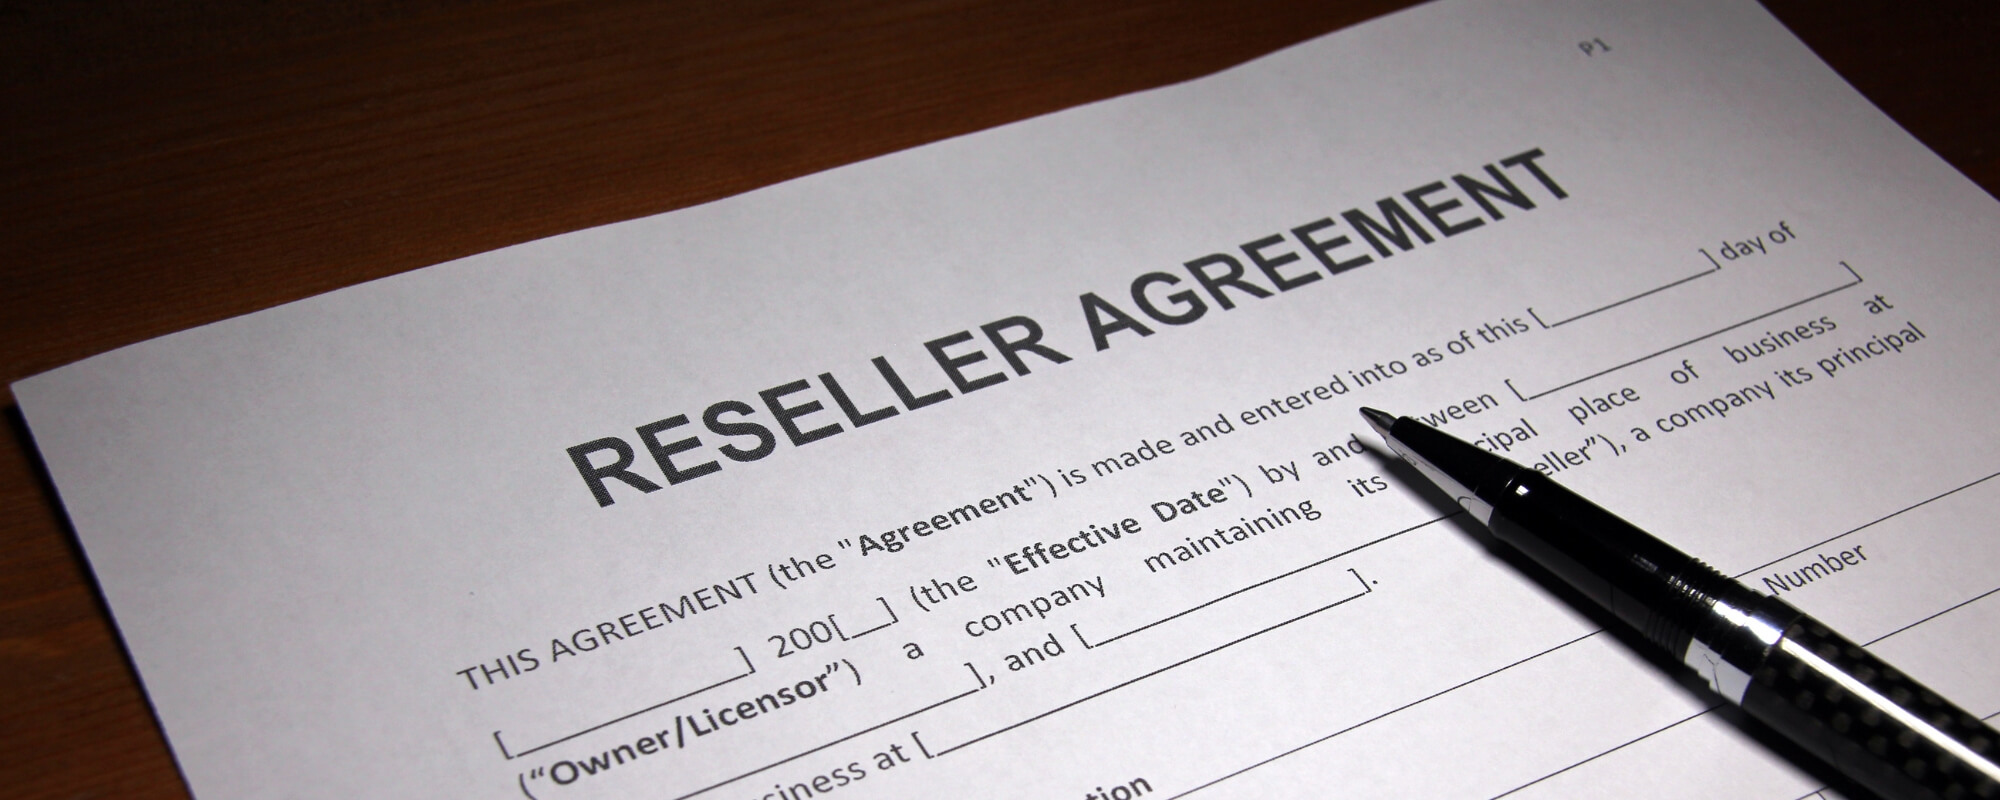 A reseller agreement on paper - How to set up an authorized reseller/dealer program